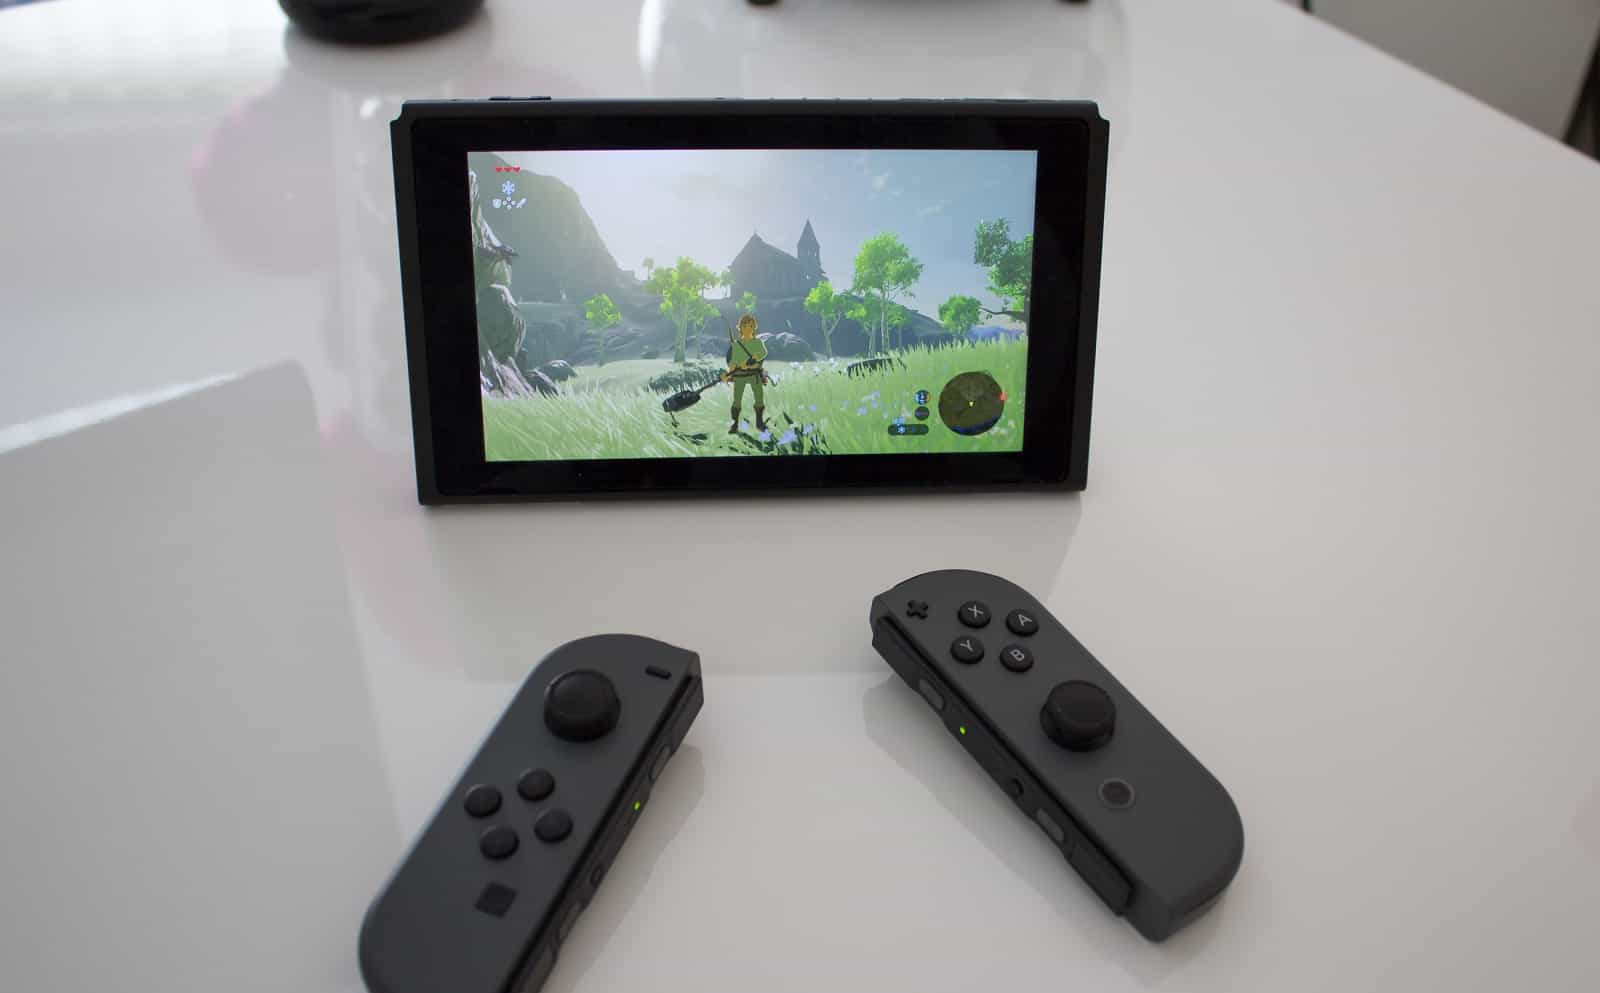 The Nintendo Switch's flexible Joy-Con controllers work just fine with a Mac (but not an iPhone).